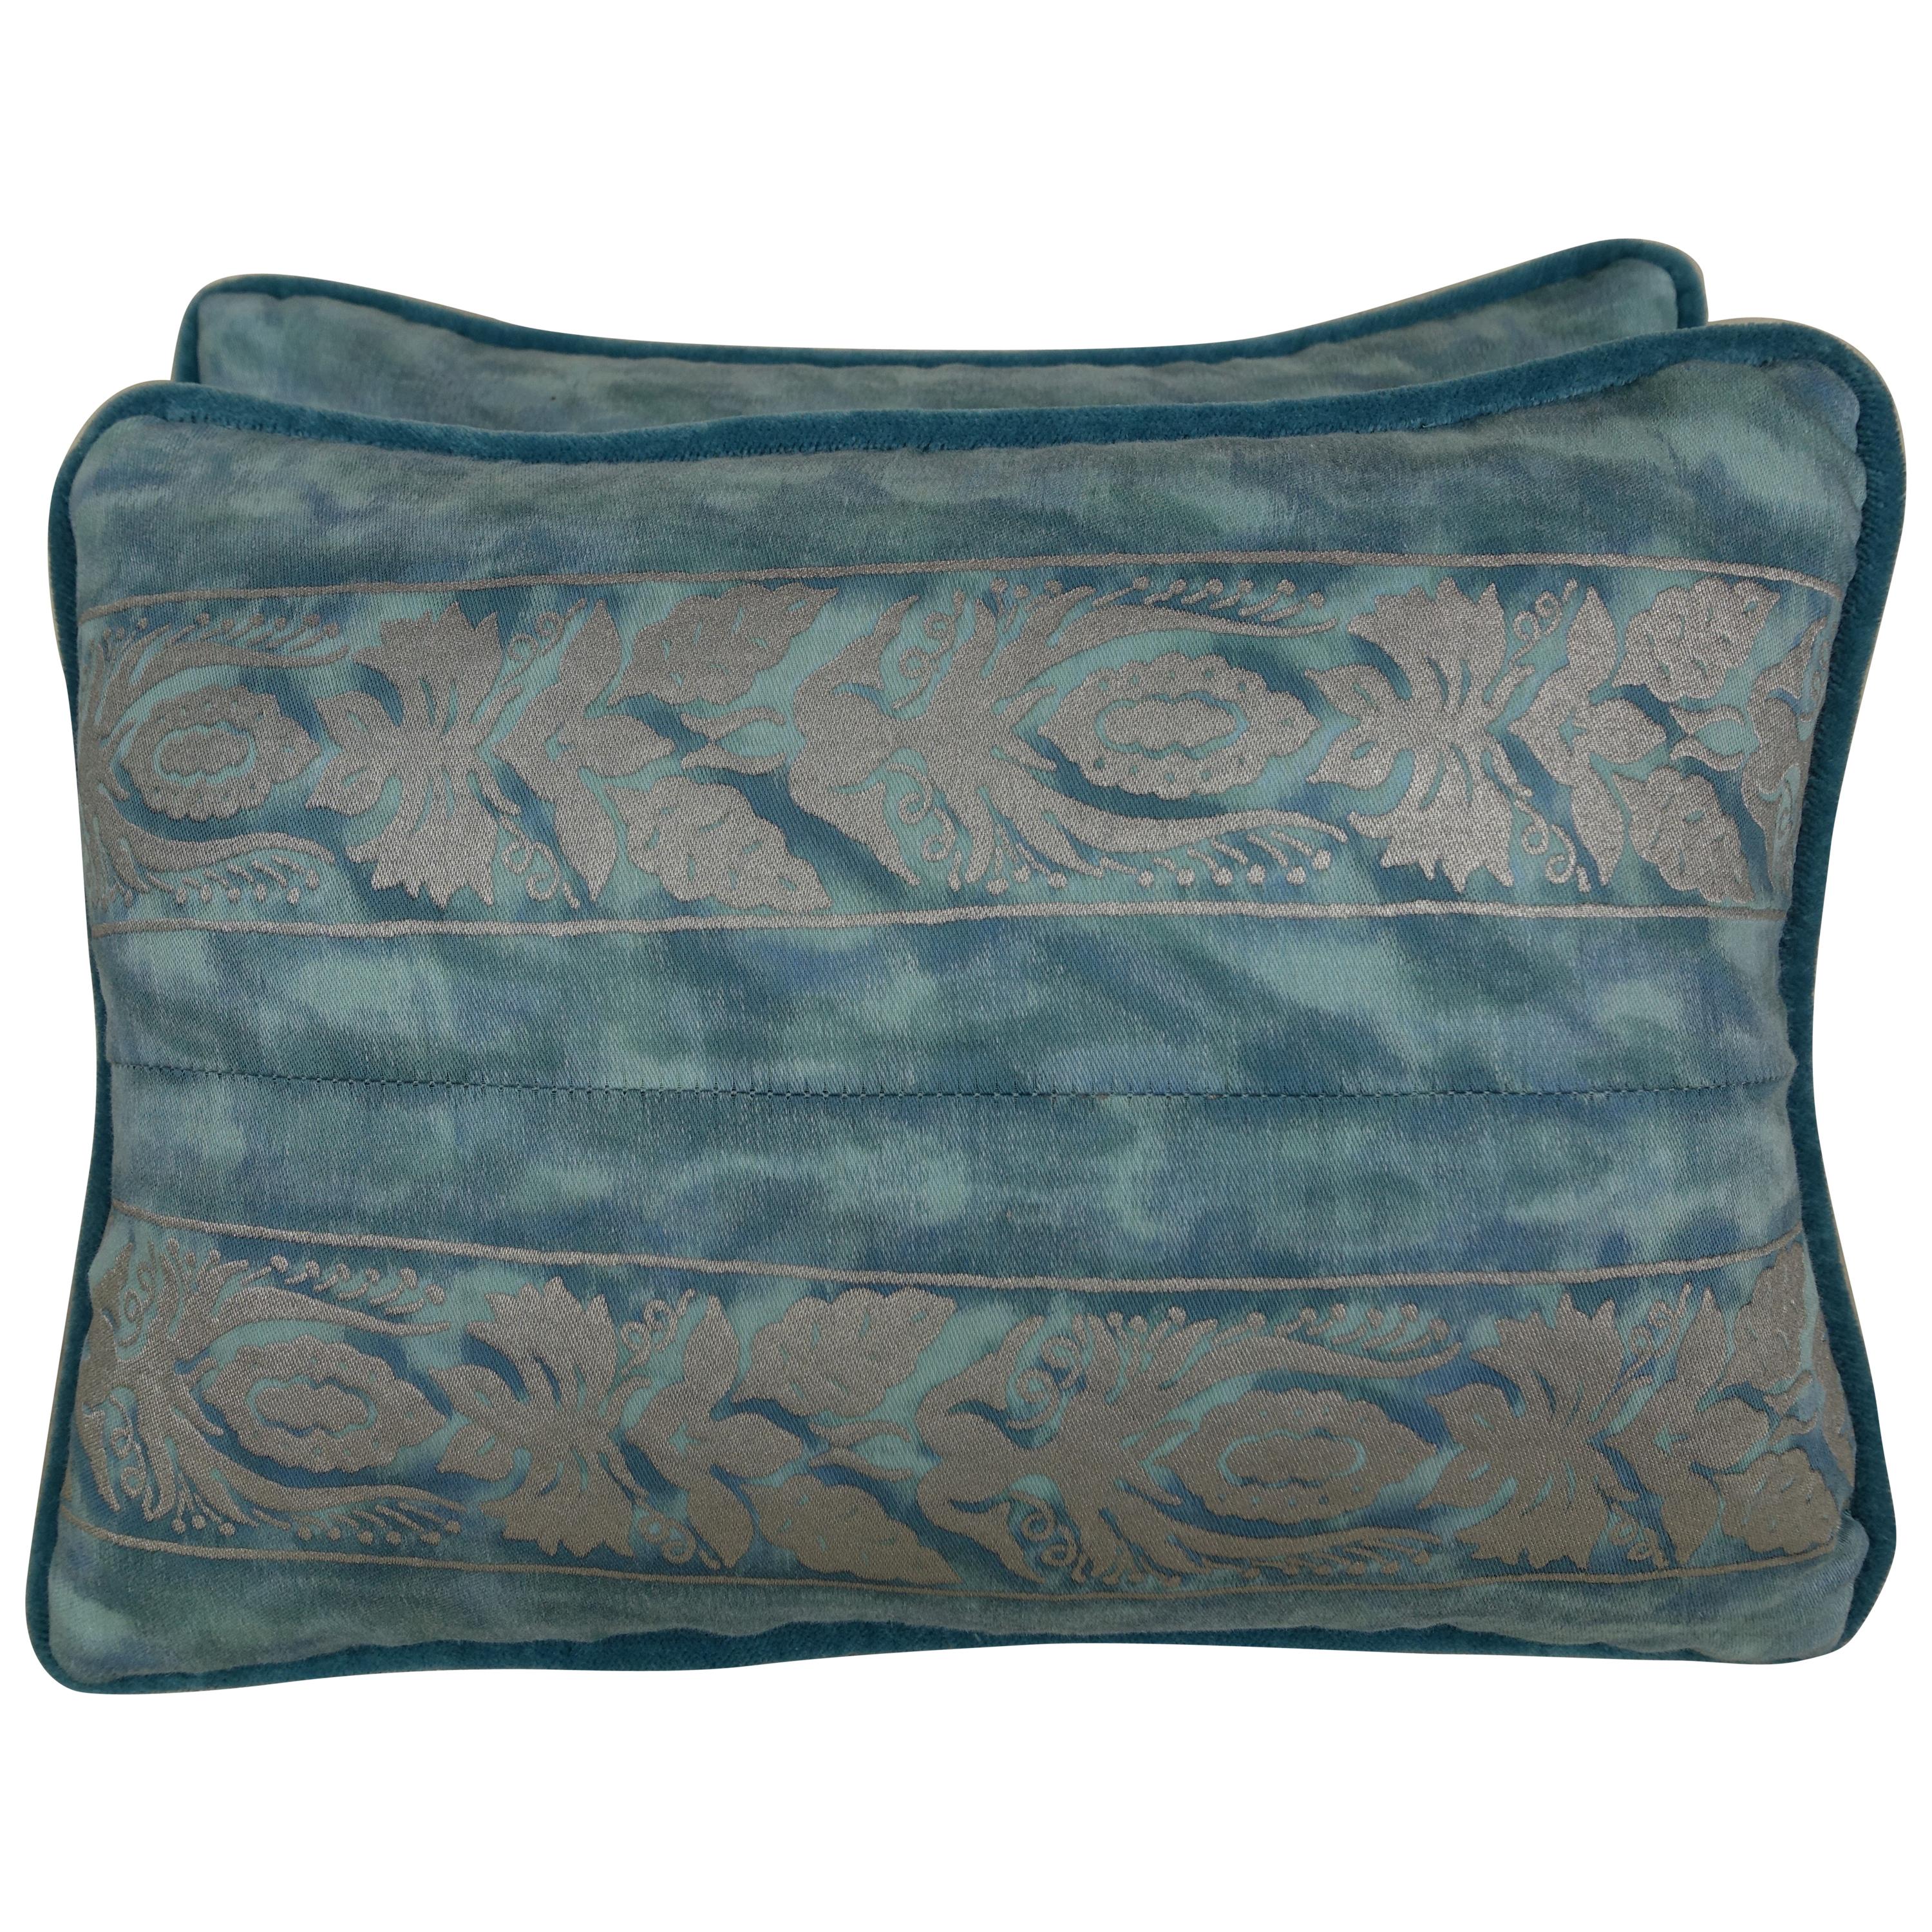 Pair of Blue and Silver Fortuny Pillows